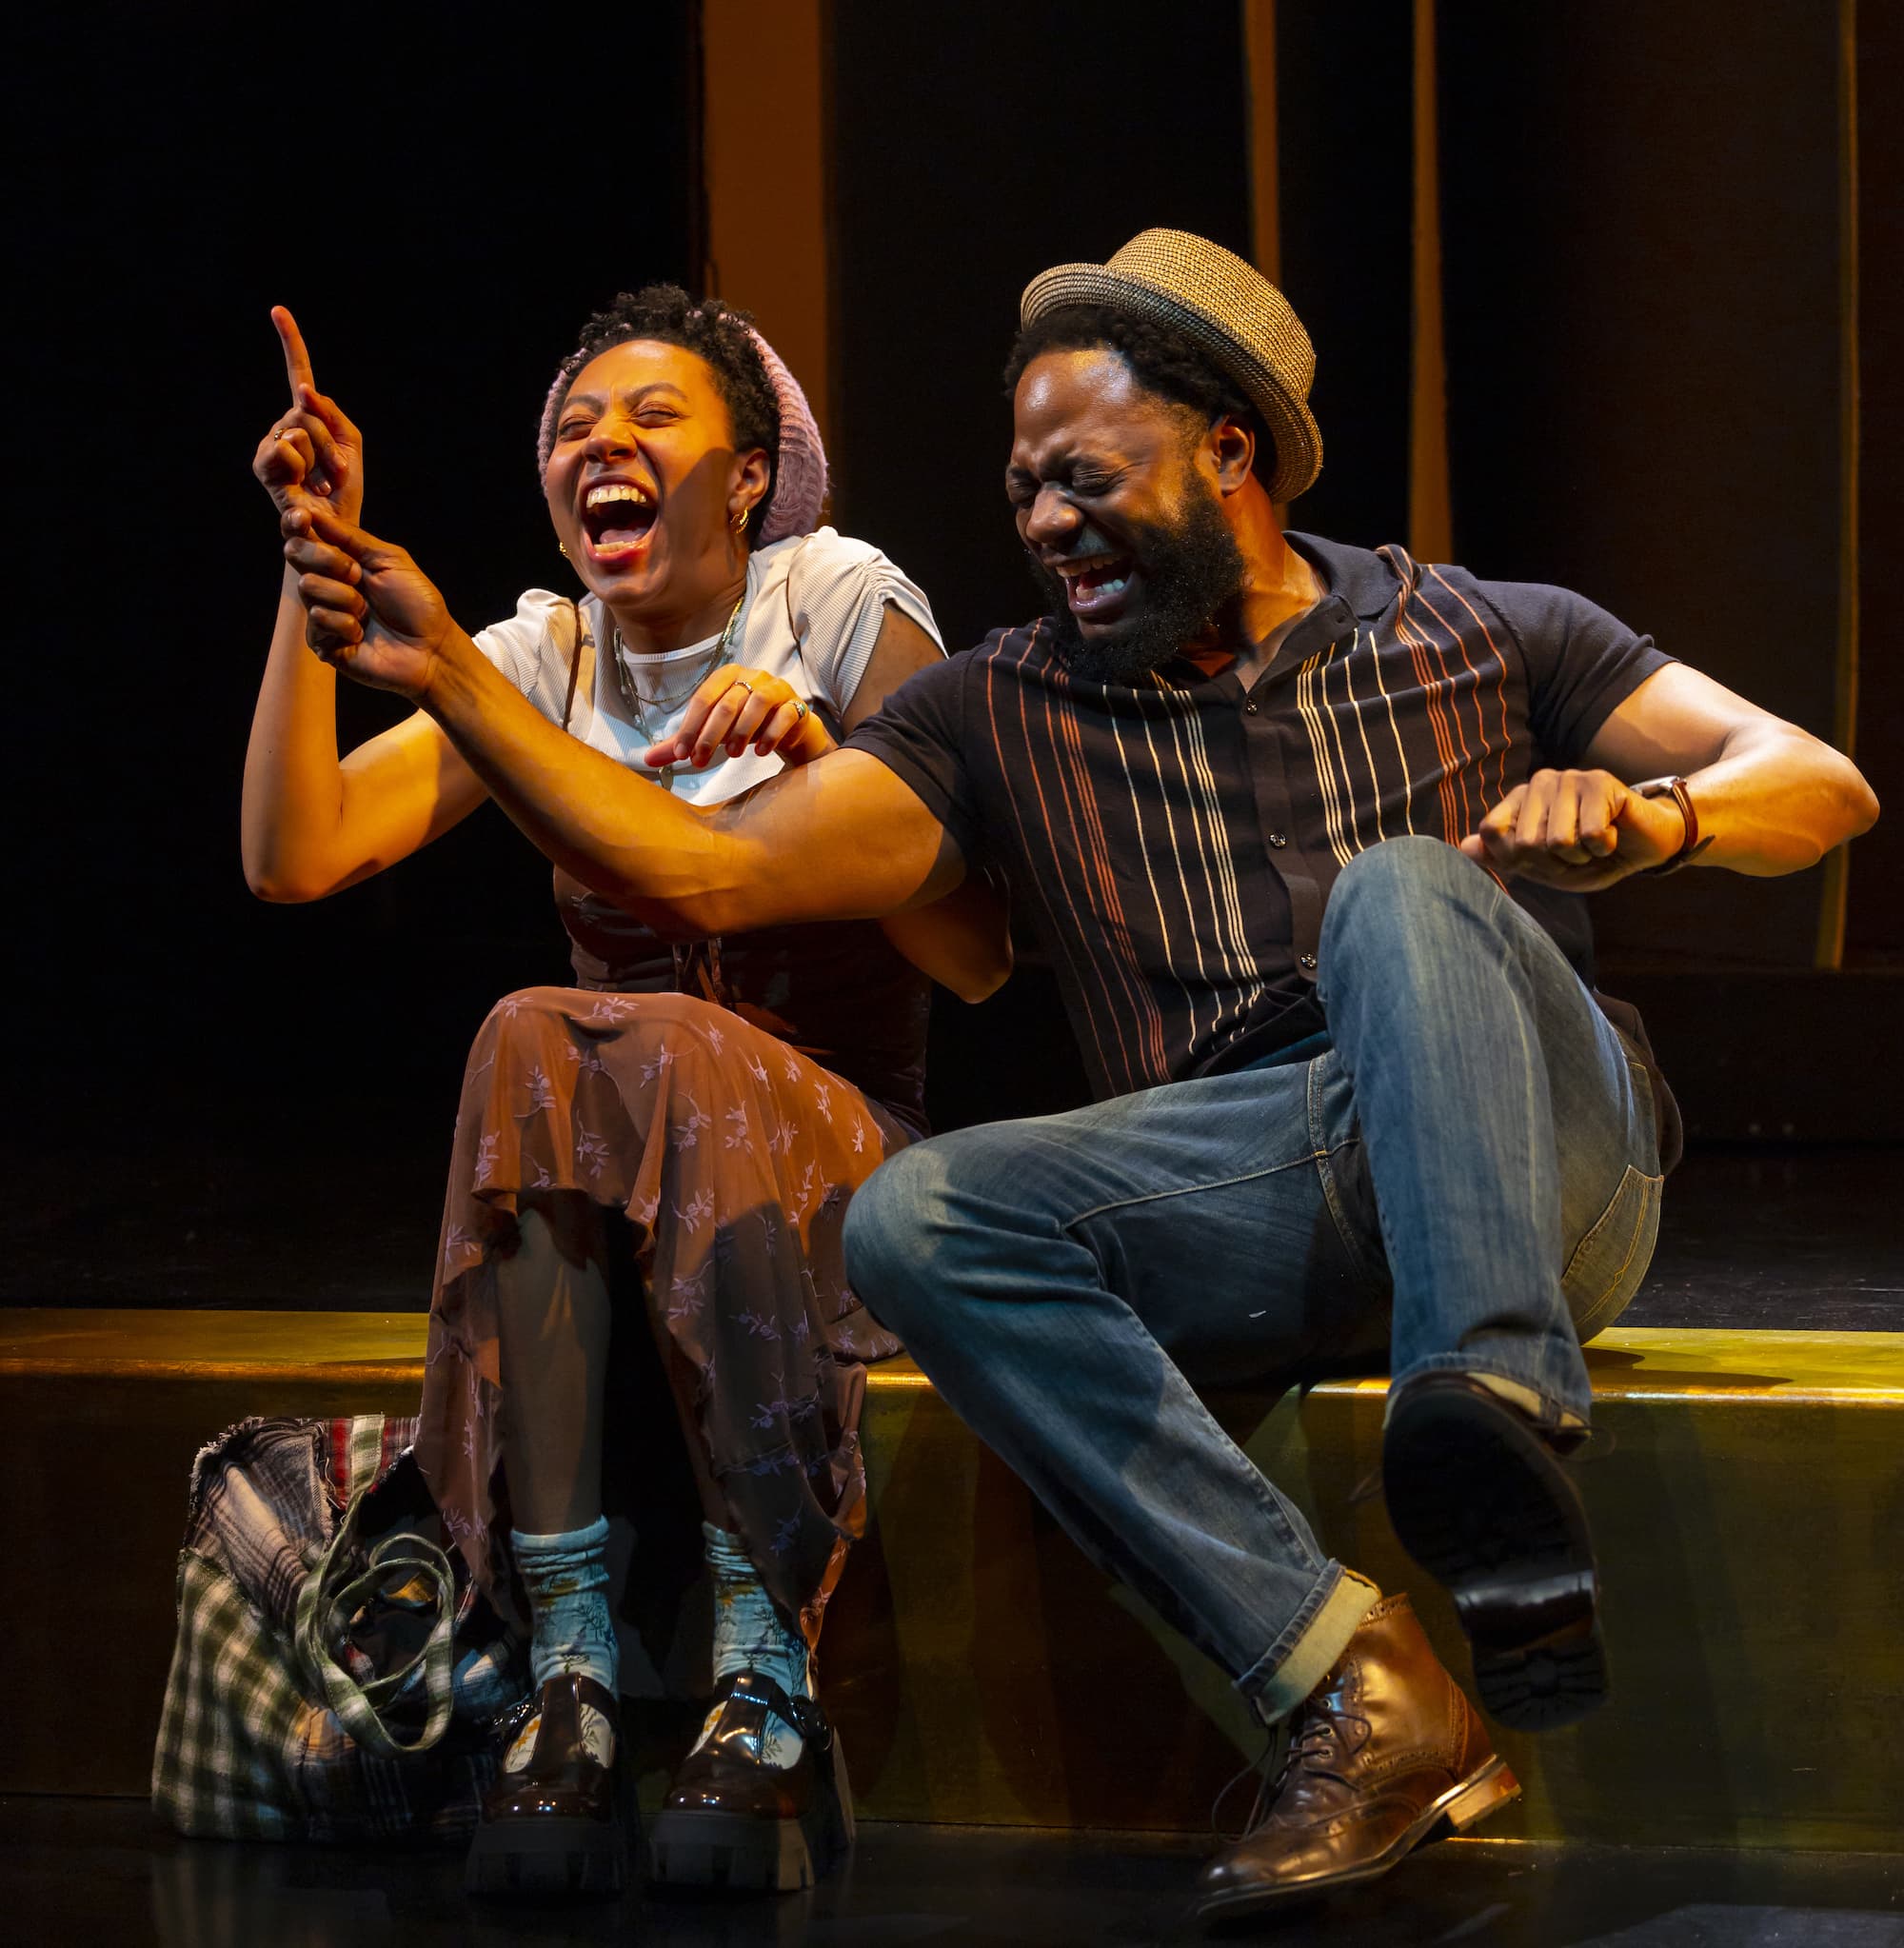 Regan Sims as Lala and James Ricardo Milord as her father in &quot;K-I-S-S-I-N-G&quot; at the Boston Center for the Arts' Wimberly Theatre. (Courtesy T Charles Erickson)